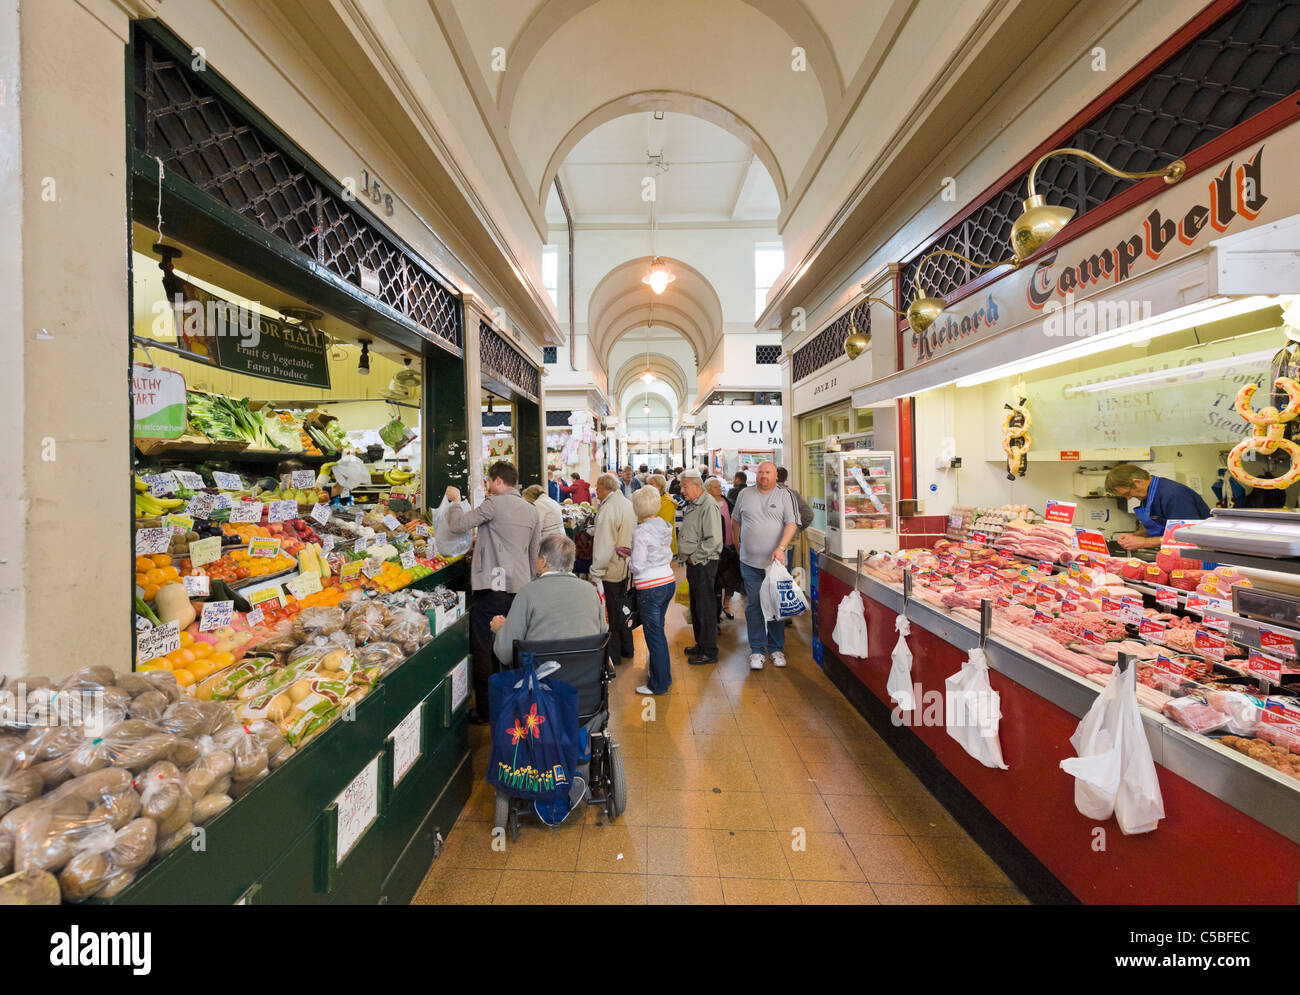 Butchers and greengrocers stalls in the historic Grainger Market, Grainger Town, Newcastle upon Tyne, Tyne and Wear, UK Stock Photo